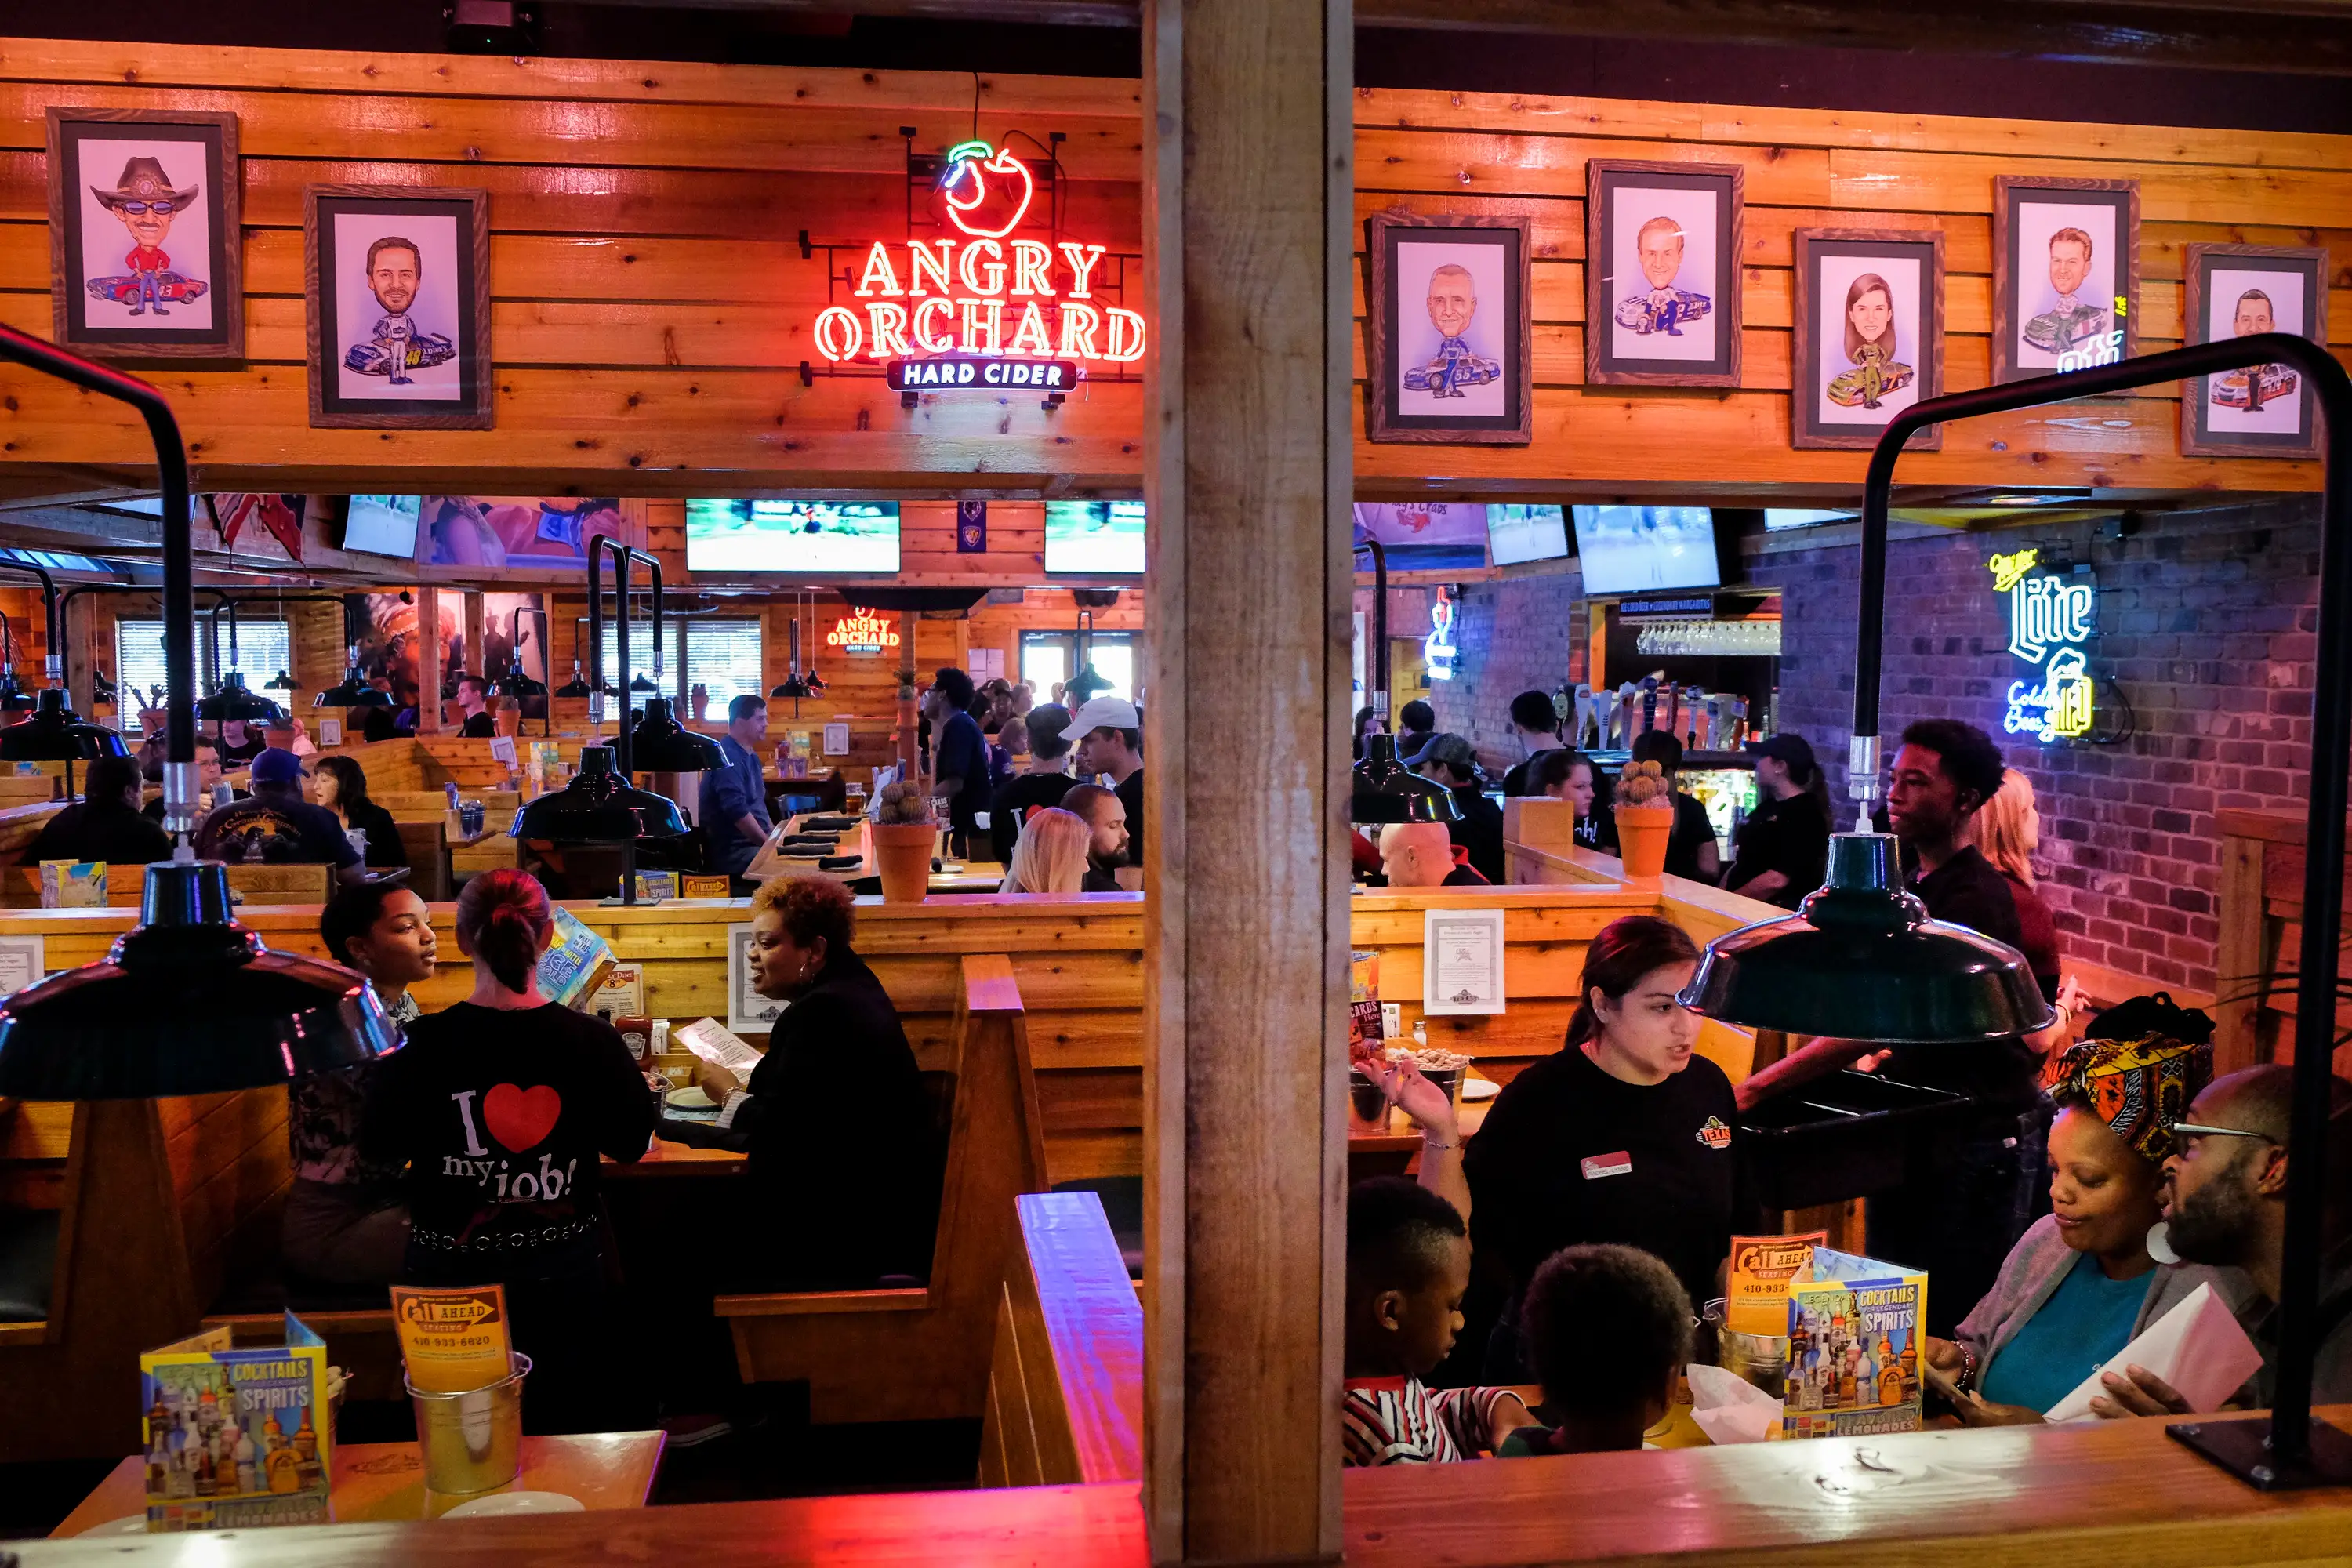 Texas Roadhouse: Age Discrimination Against Job Applicants Over 40